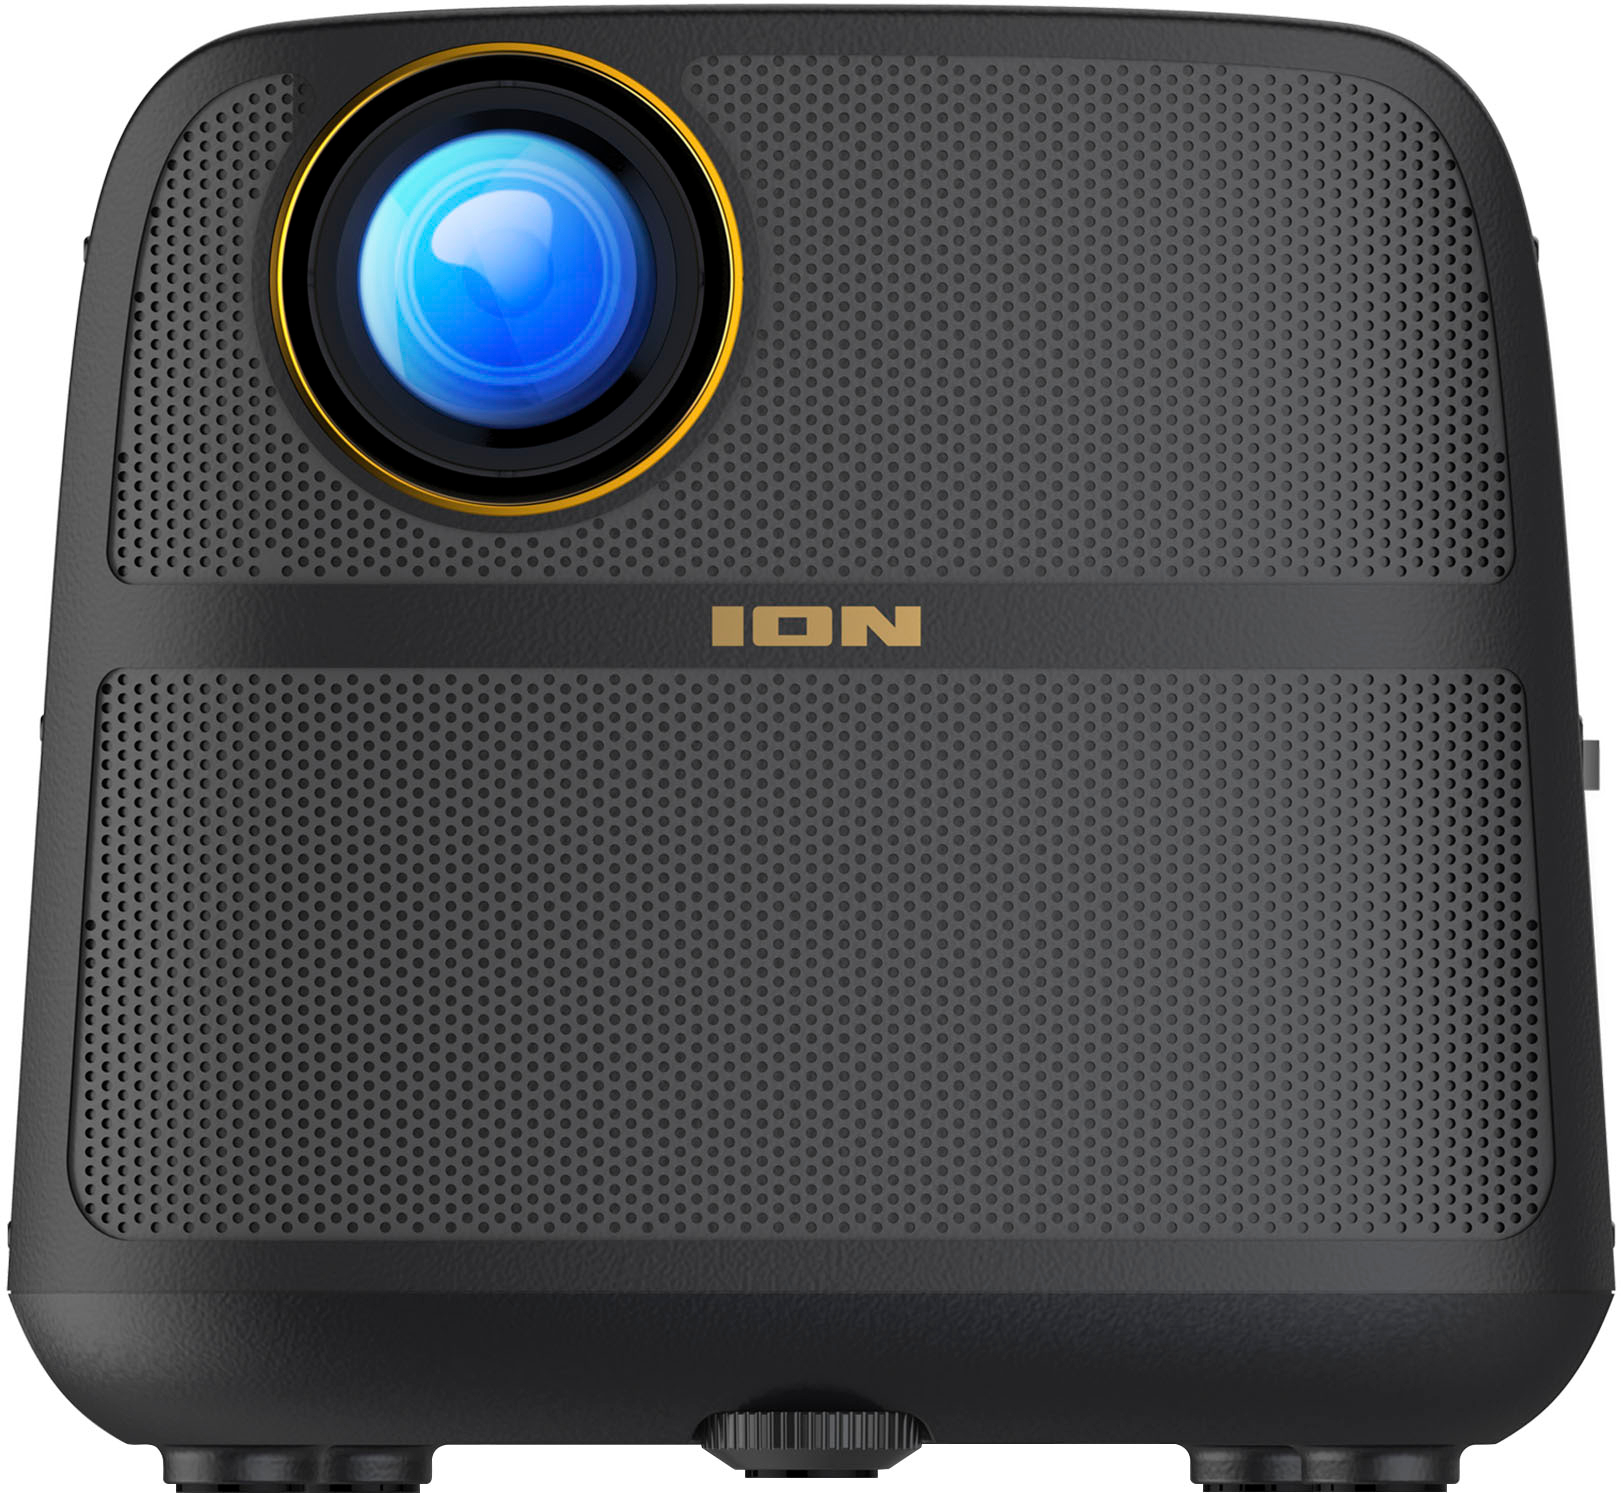 Angle View: Epson - EpiqVision™ Mini EF12 Smart Streaming Laser Projector with HDR and Android TV - Black and Copper